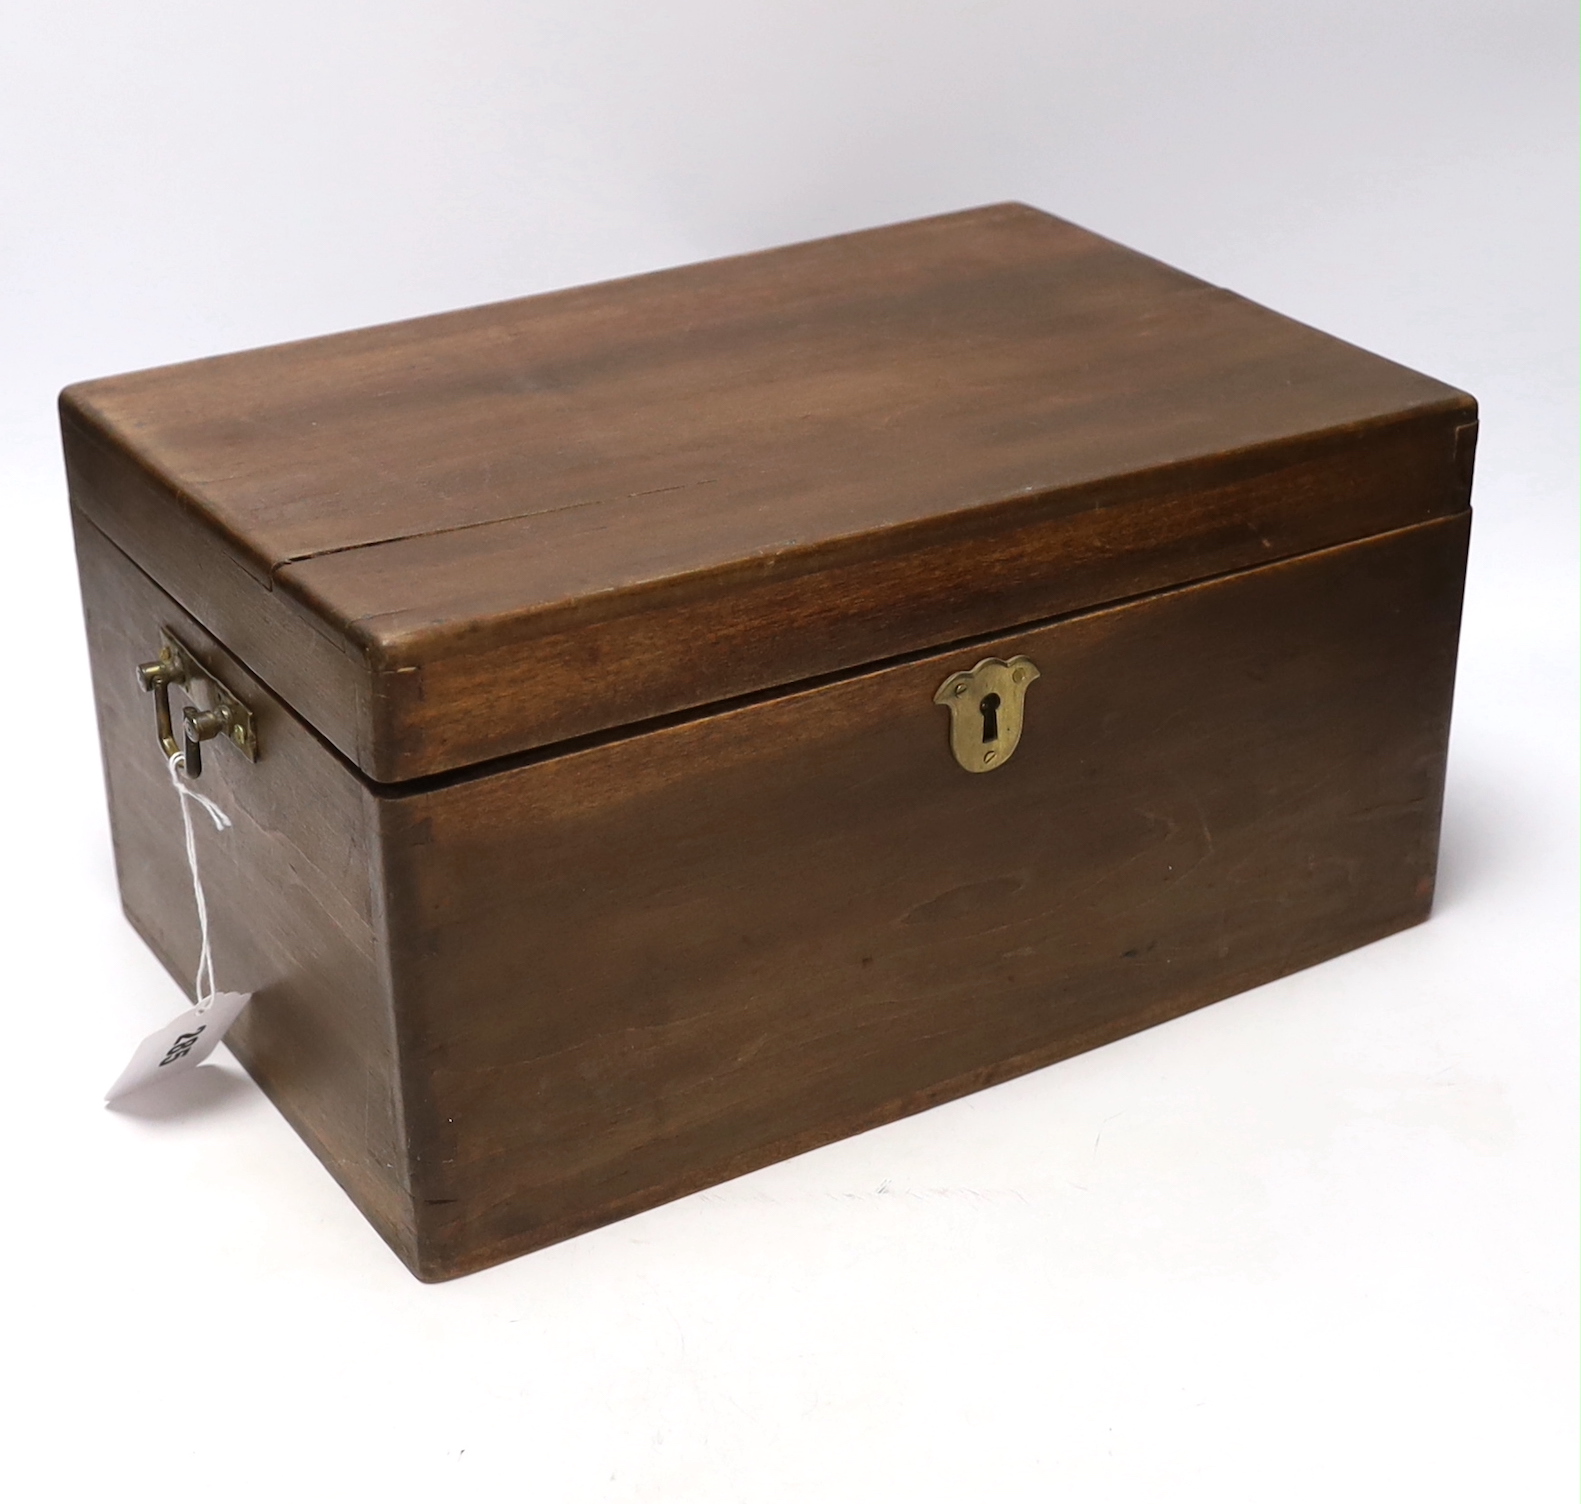 Two mahogany boxes of gun tools, including; bullet moulds, files, a vice, musket balls, etc.